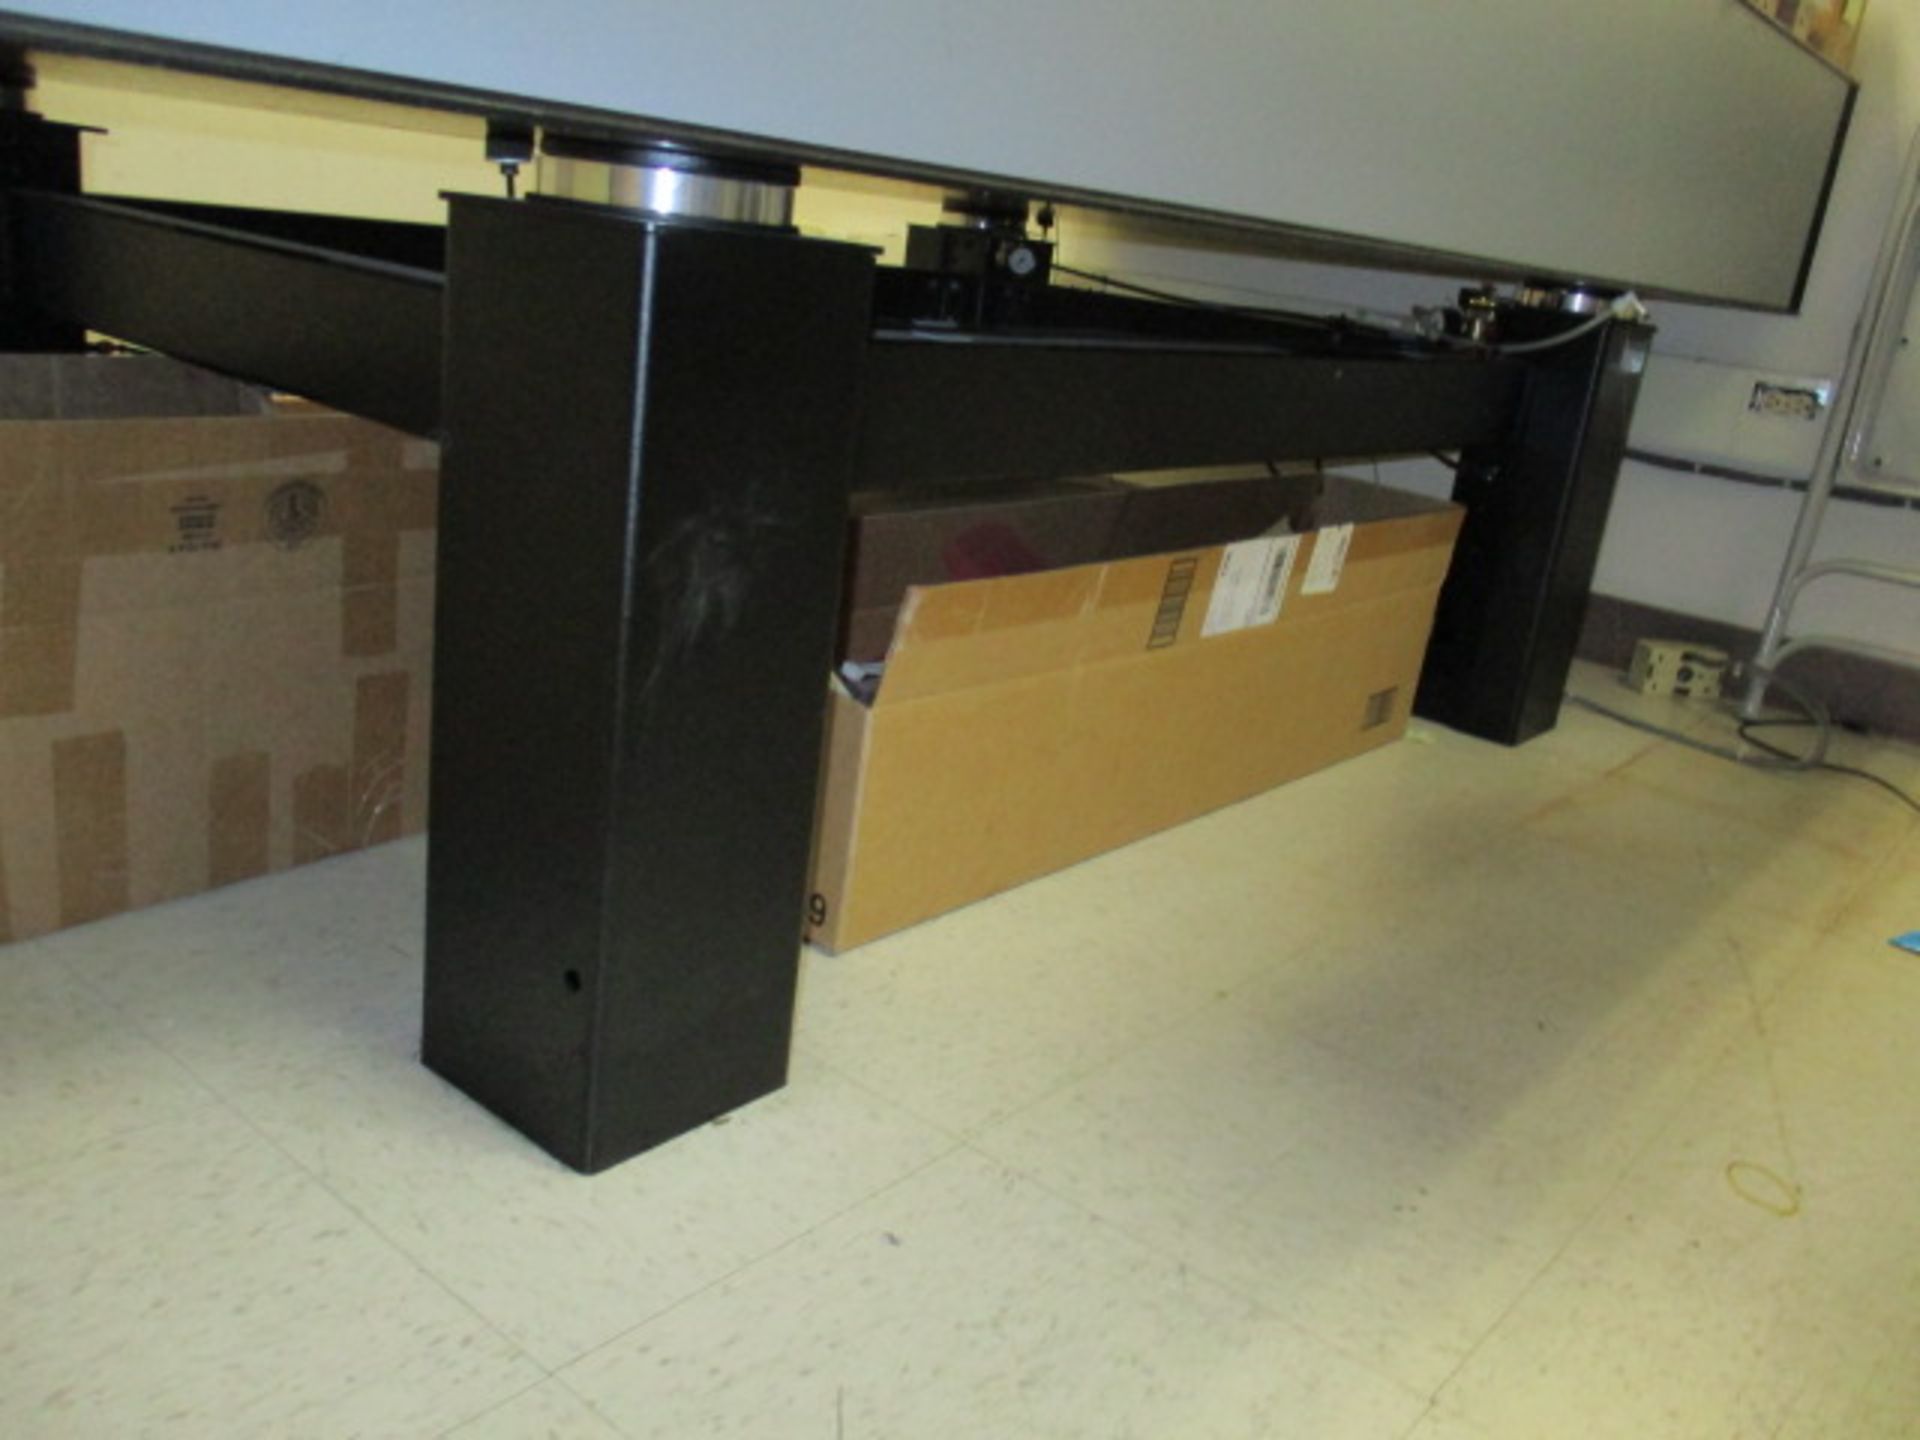 Optical Vibration Isolation Table (Newport Sealed Hole Lab Table Top 96"Lx48"Wx12"'Thk - Image 3 of 5